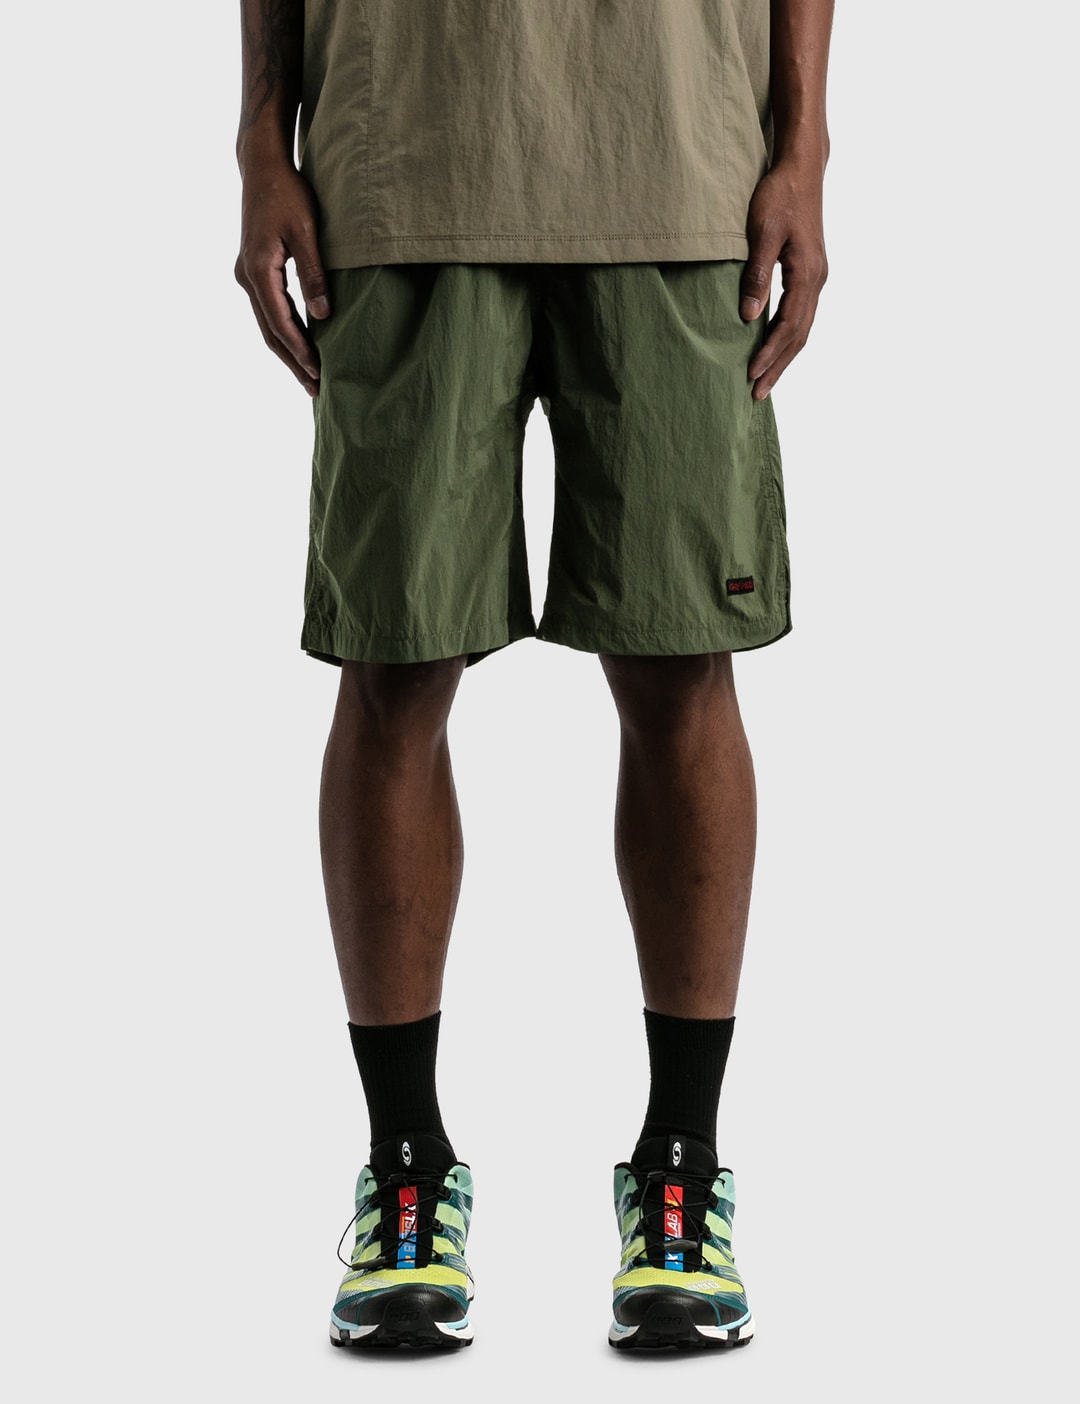 Gramicci - Packable G-shorts | HBX - Globally Curated Fashion and ...